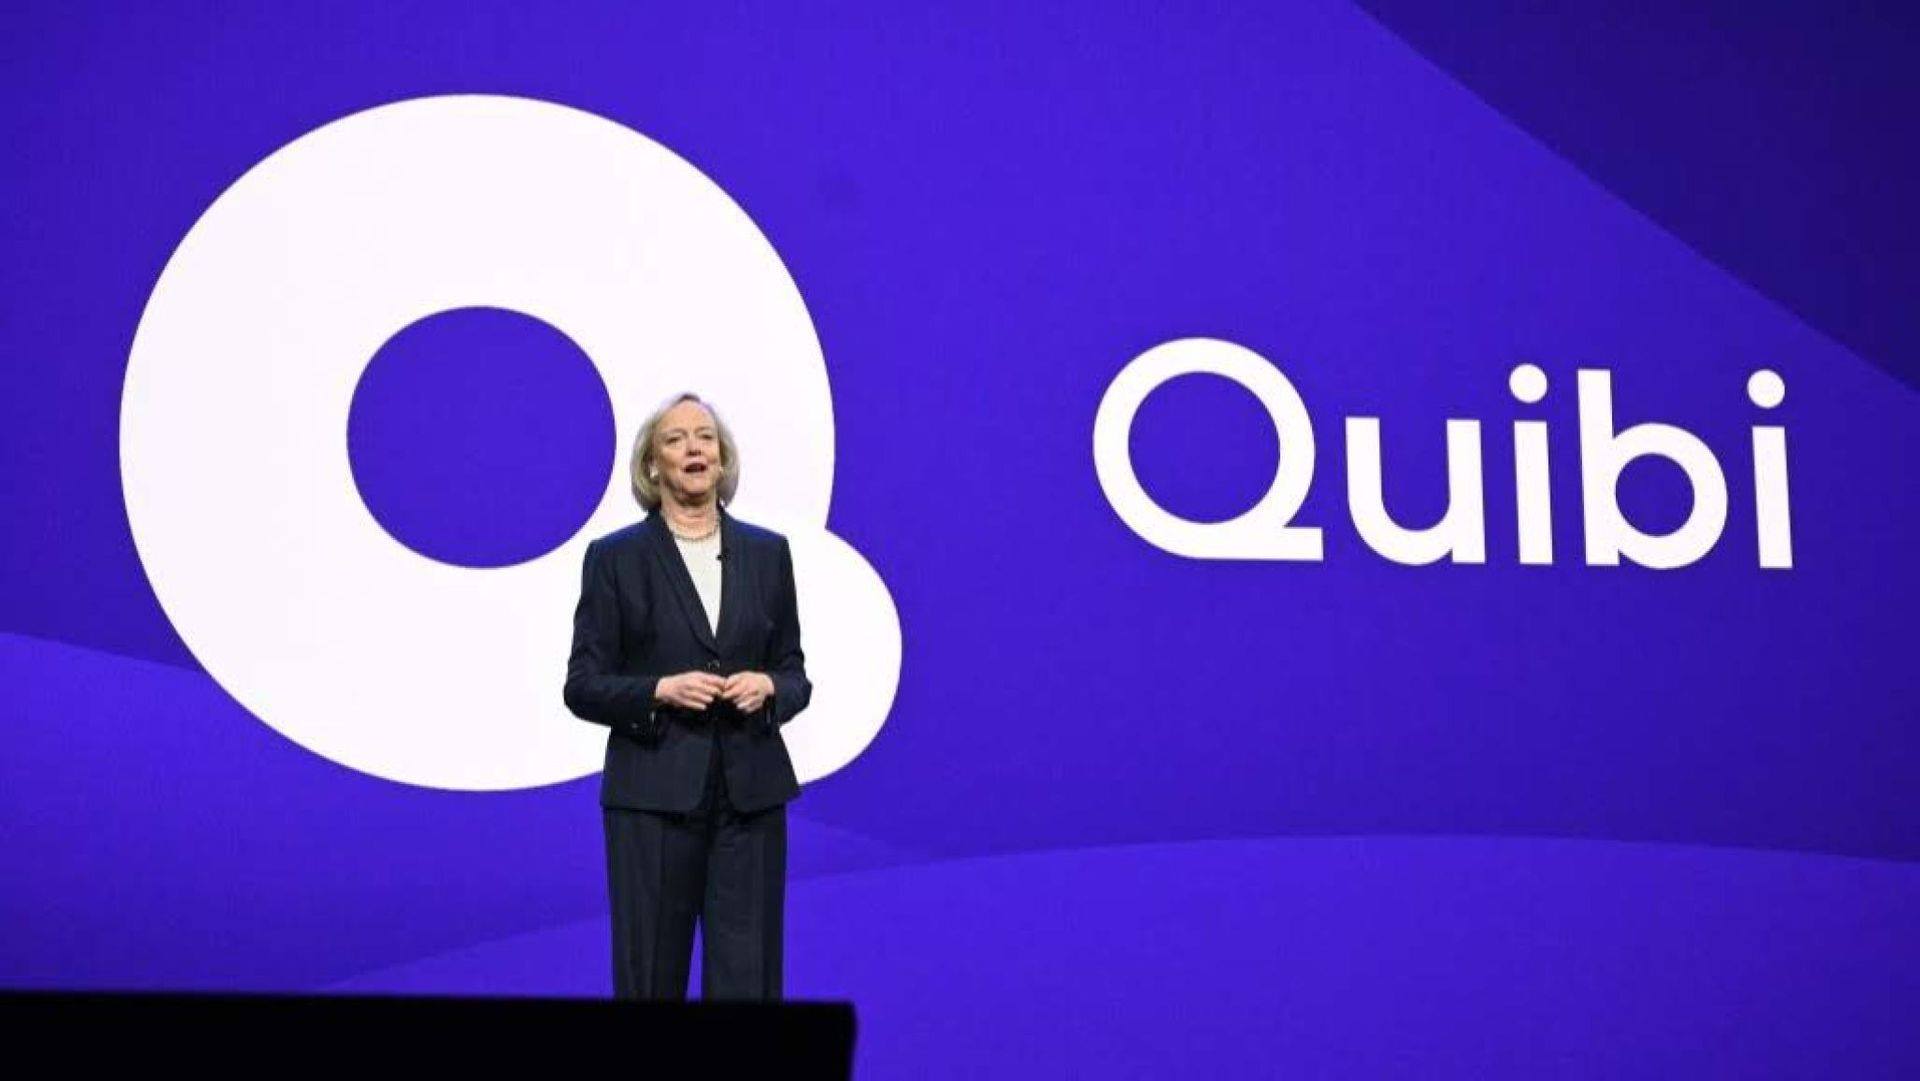 New streaming service Quibi announces closure after only six months